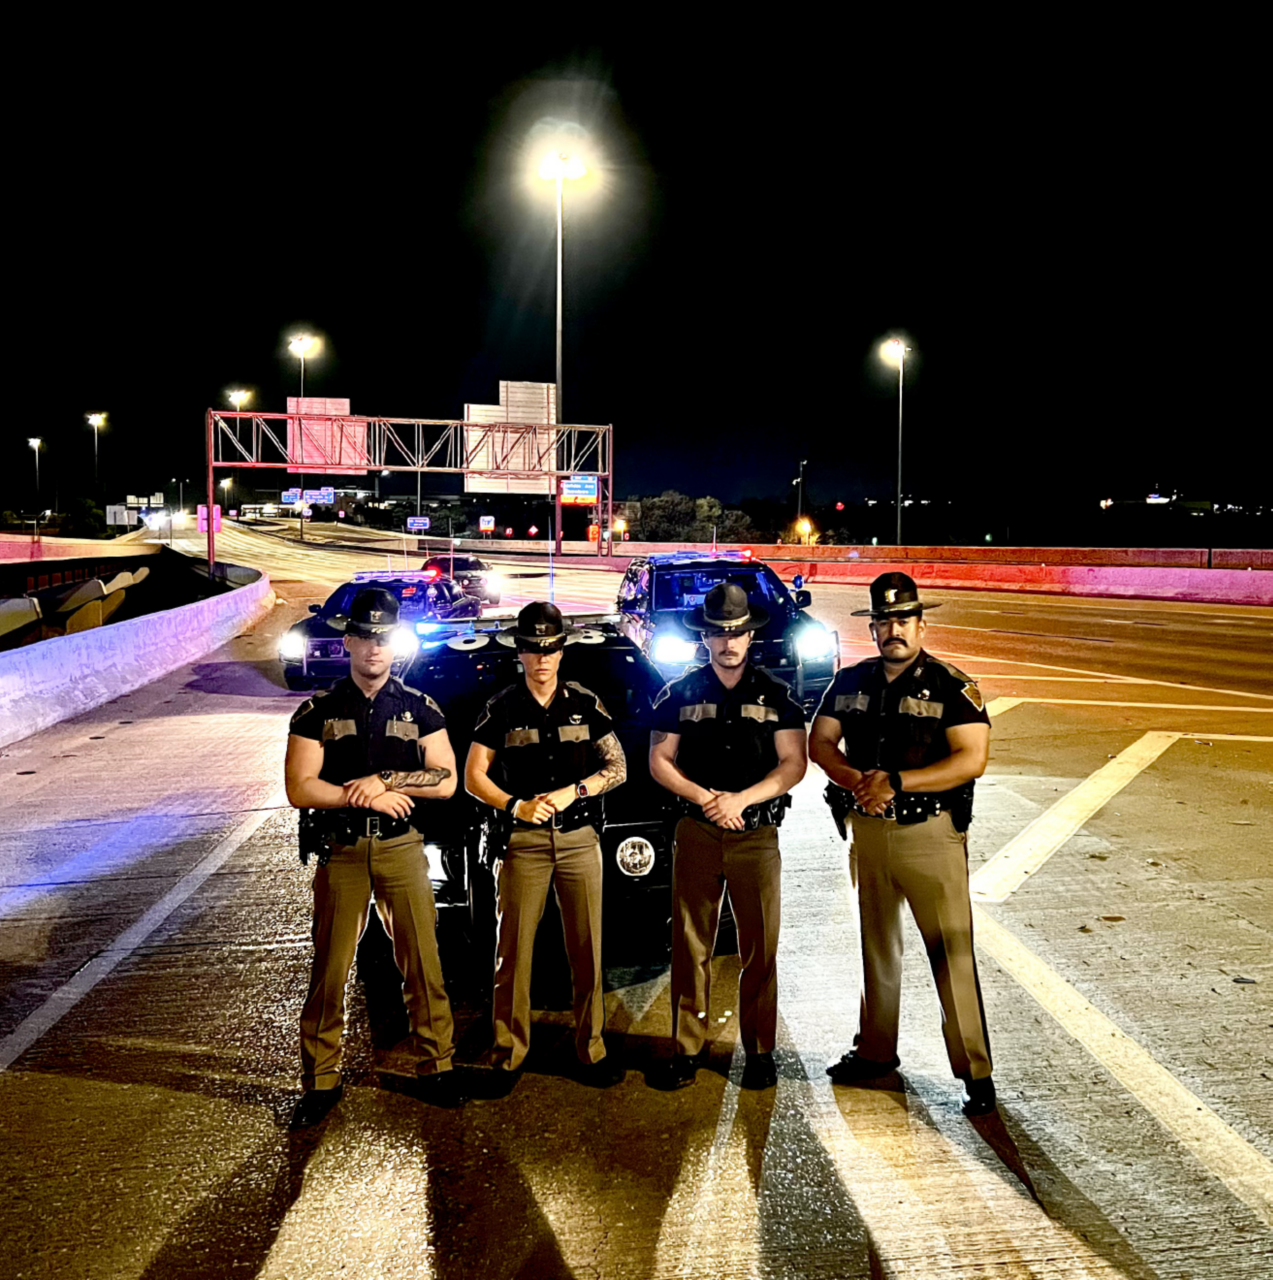 four ohp troopers standing together at night in front of their patrol cars